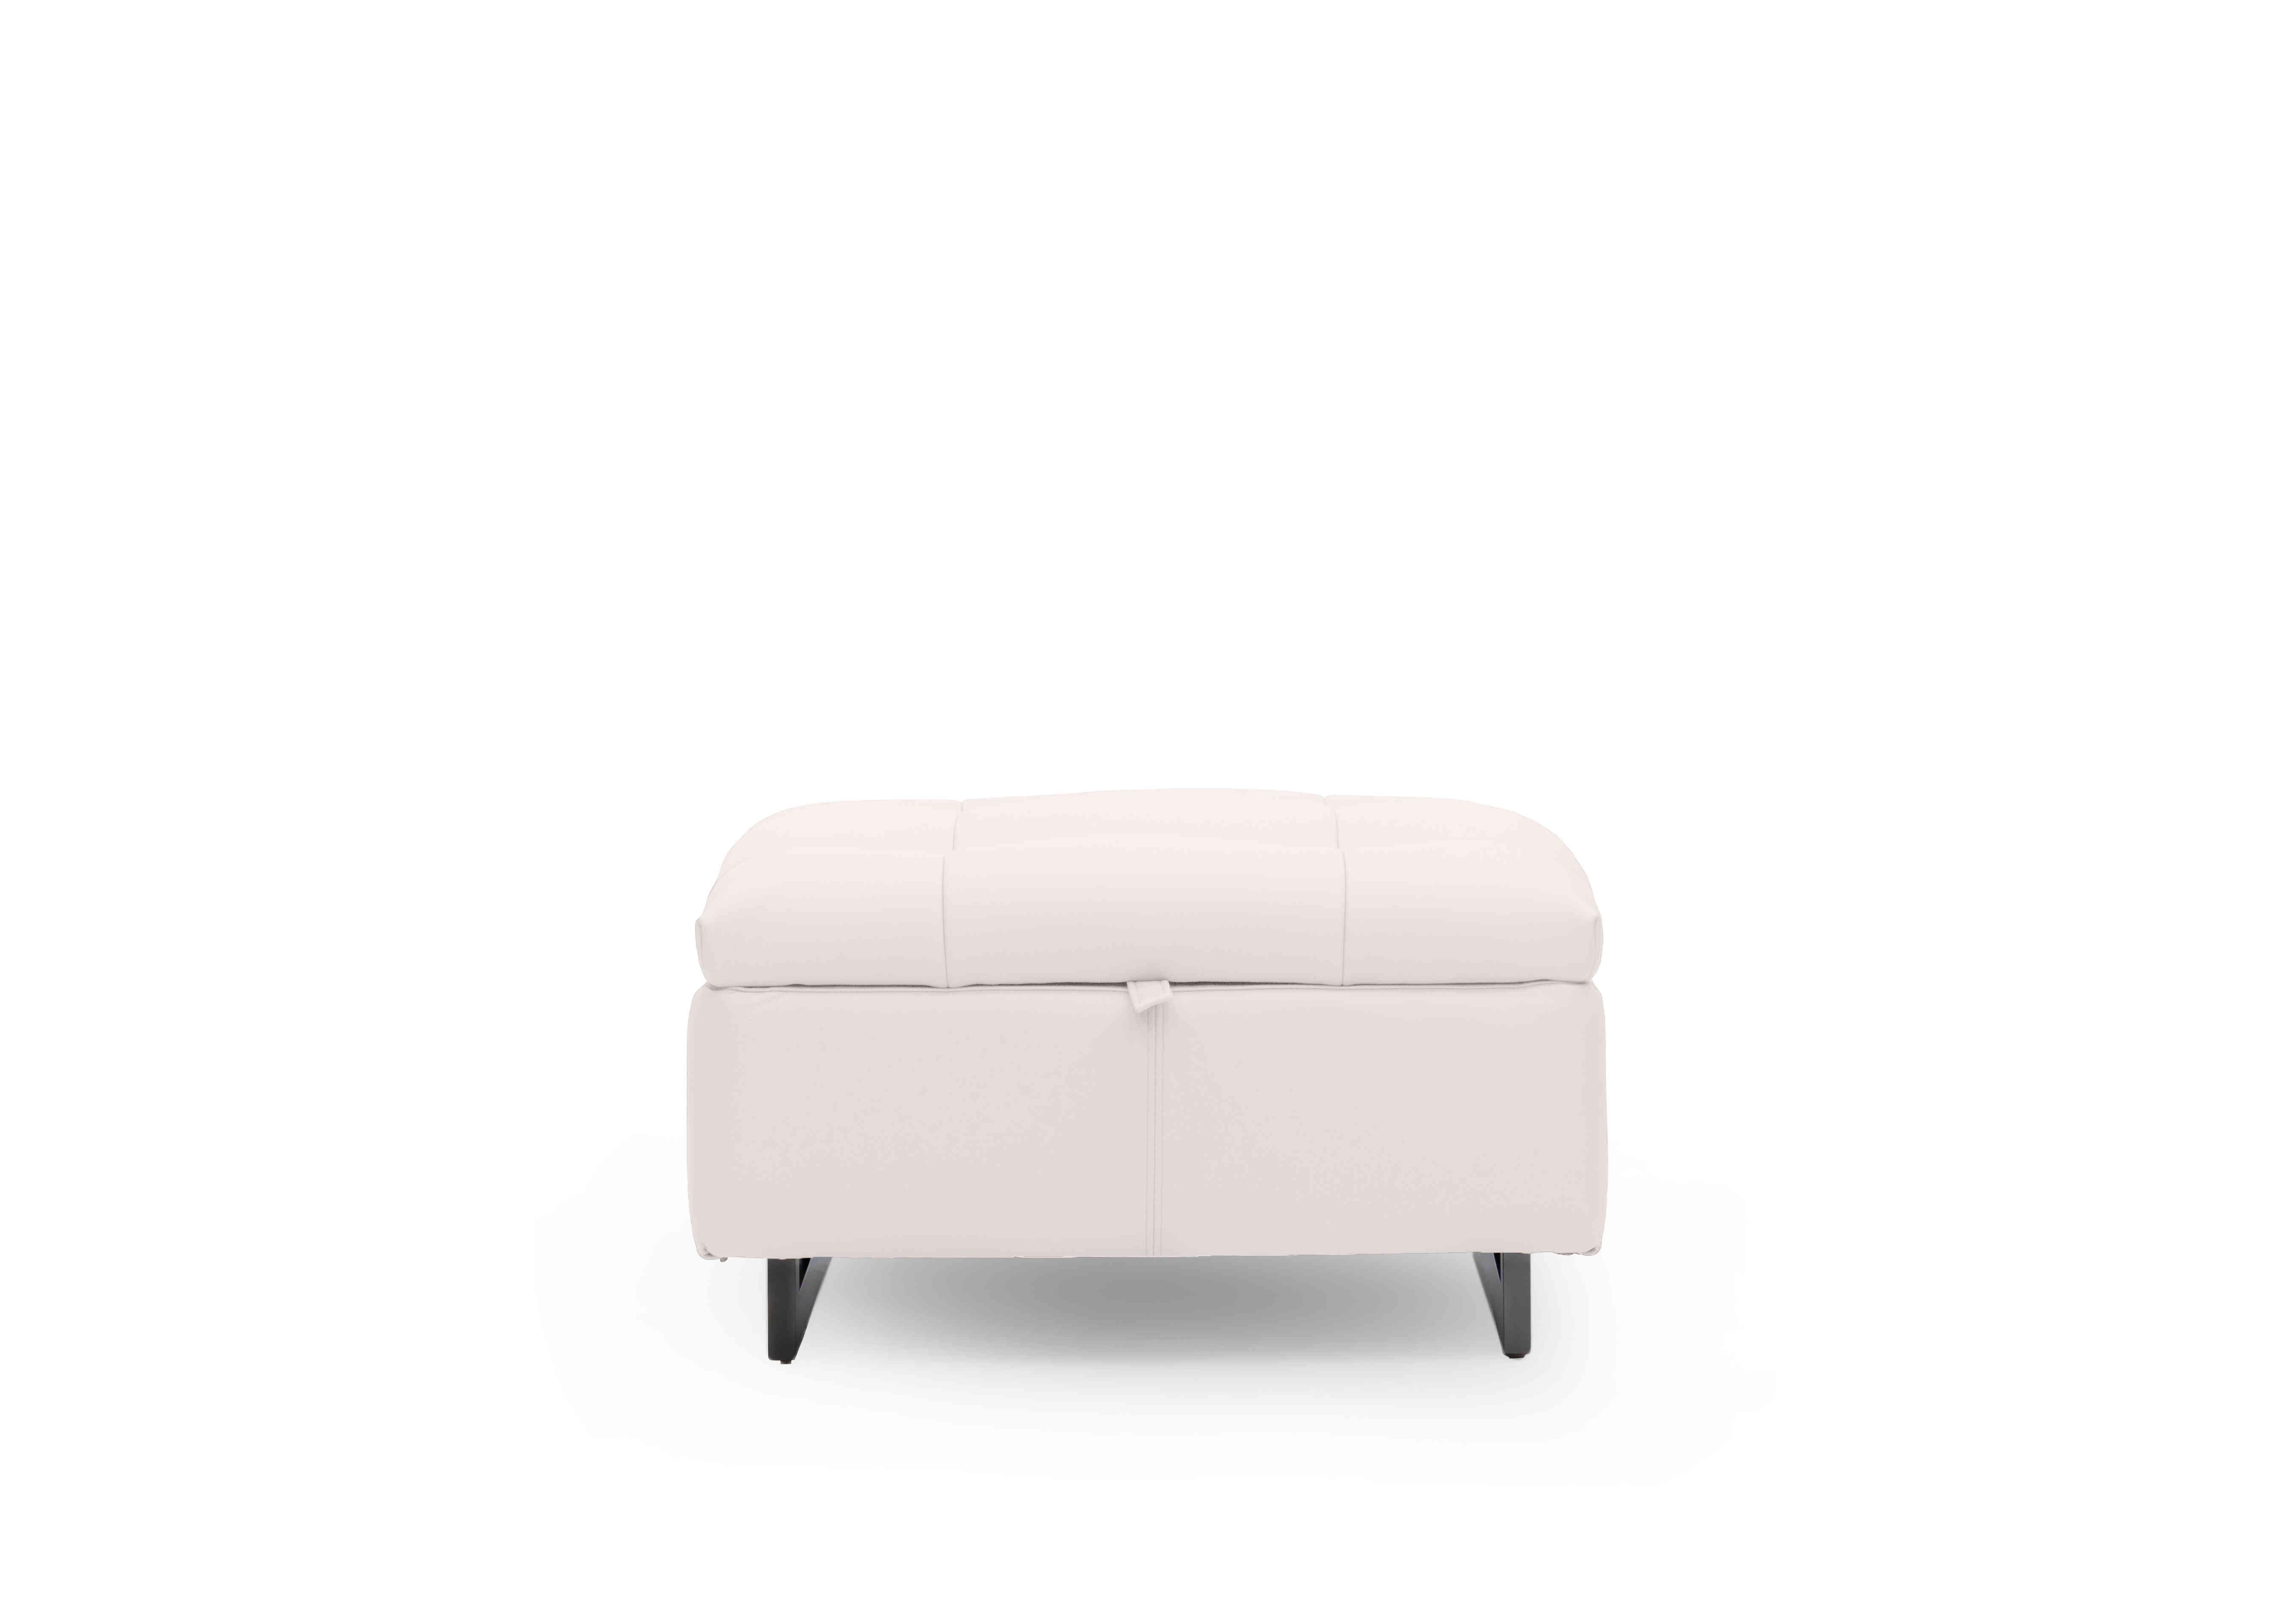 Gisella Leather Storage Footstool in Cat-40/13 Cotton on Furniture Village